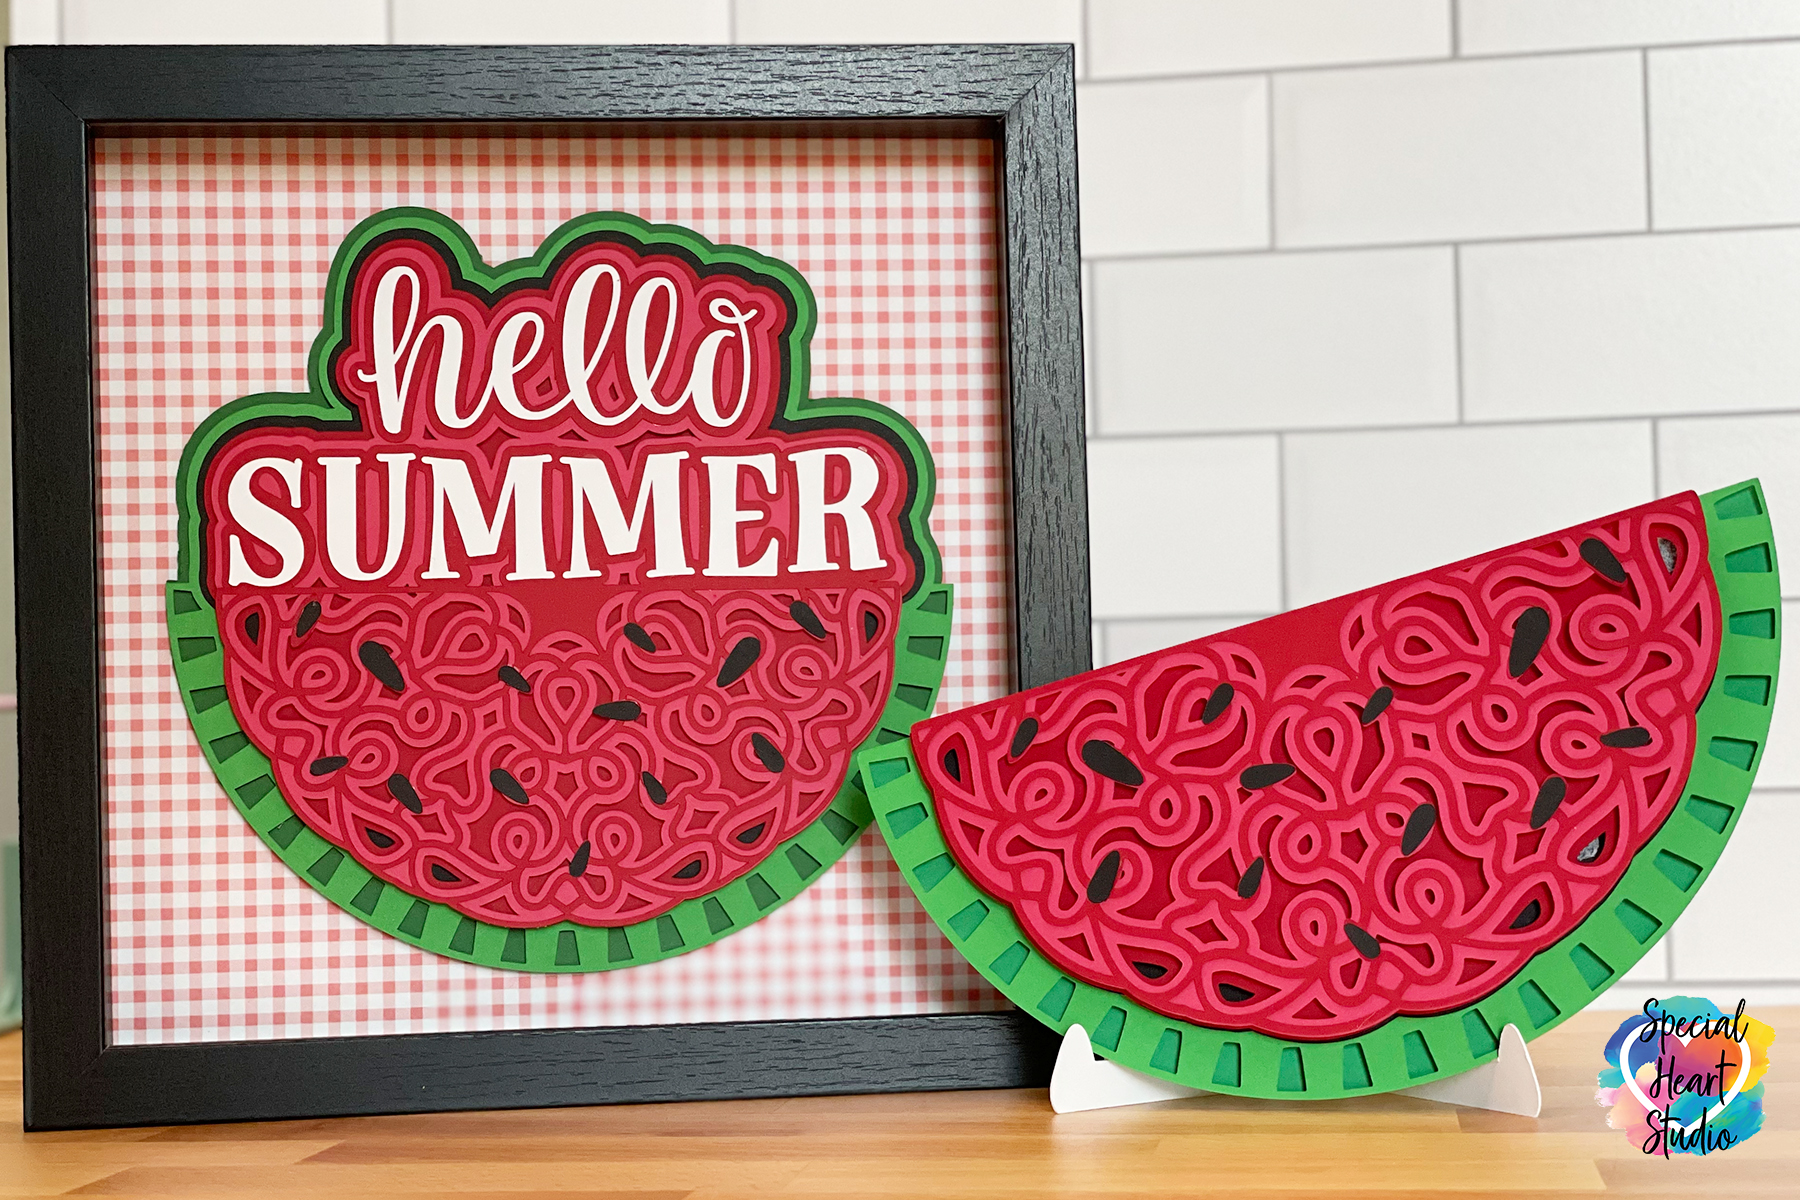 A paper watermelon made in a mandala pattern sits on a table next to a similar paper watermelon mandala in a frame with picnic checkered paper and "Hello Summer" written above.